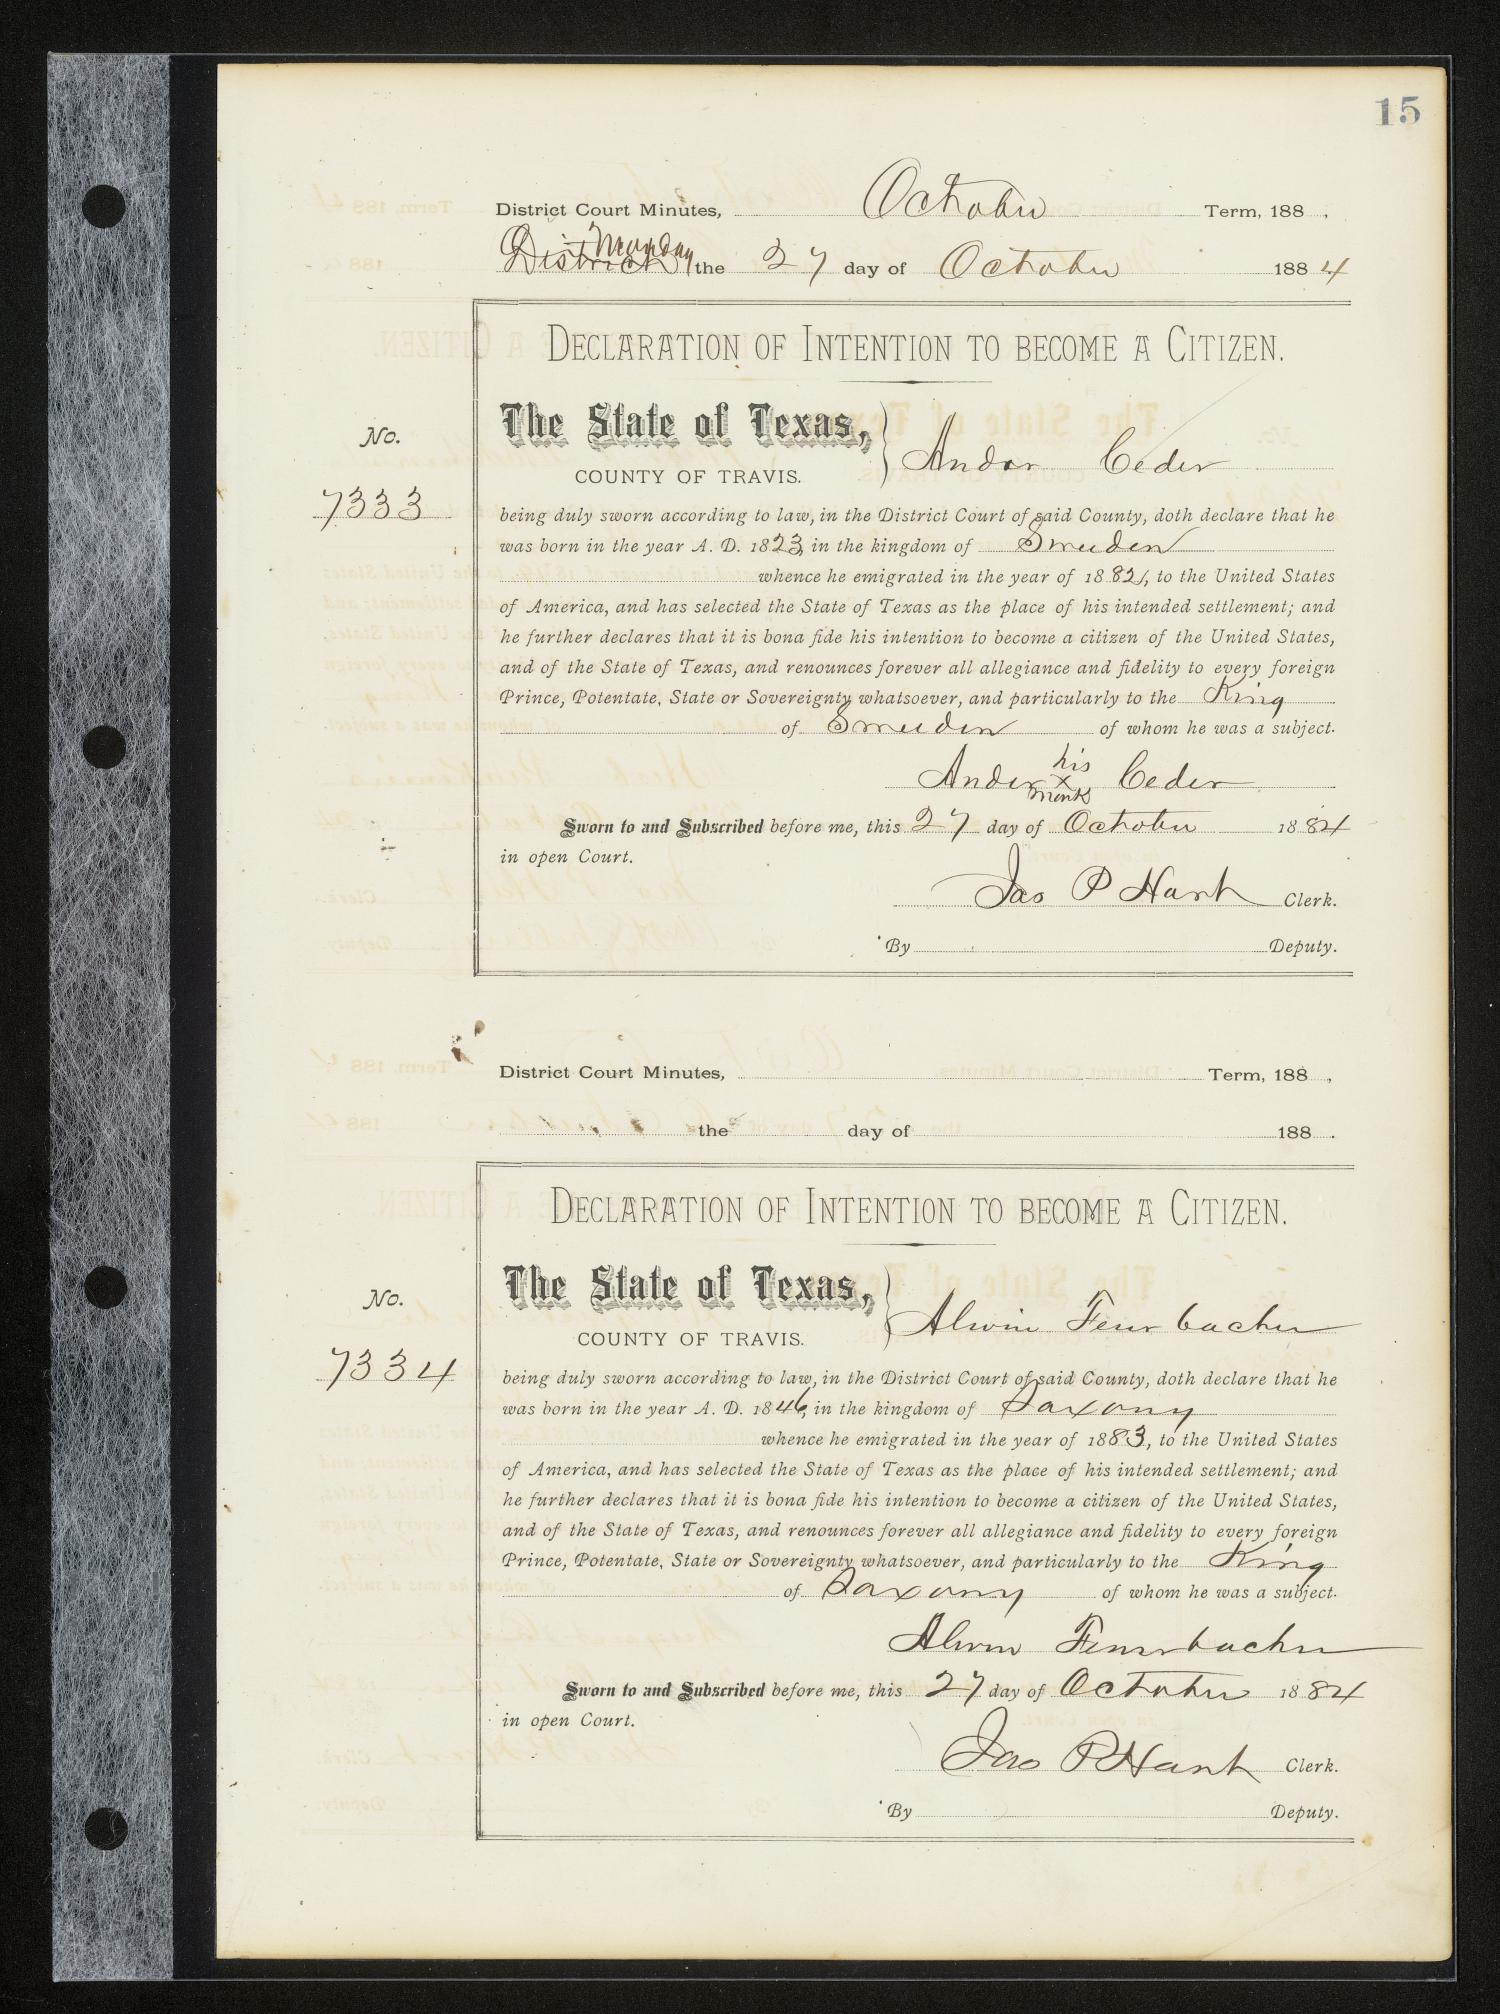 Travis County Naturalization Records: Declaration Minutes A, pages 1-208
                                                
                                                    15
                                                